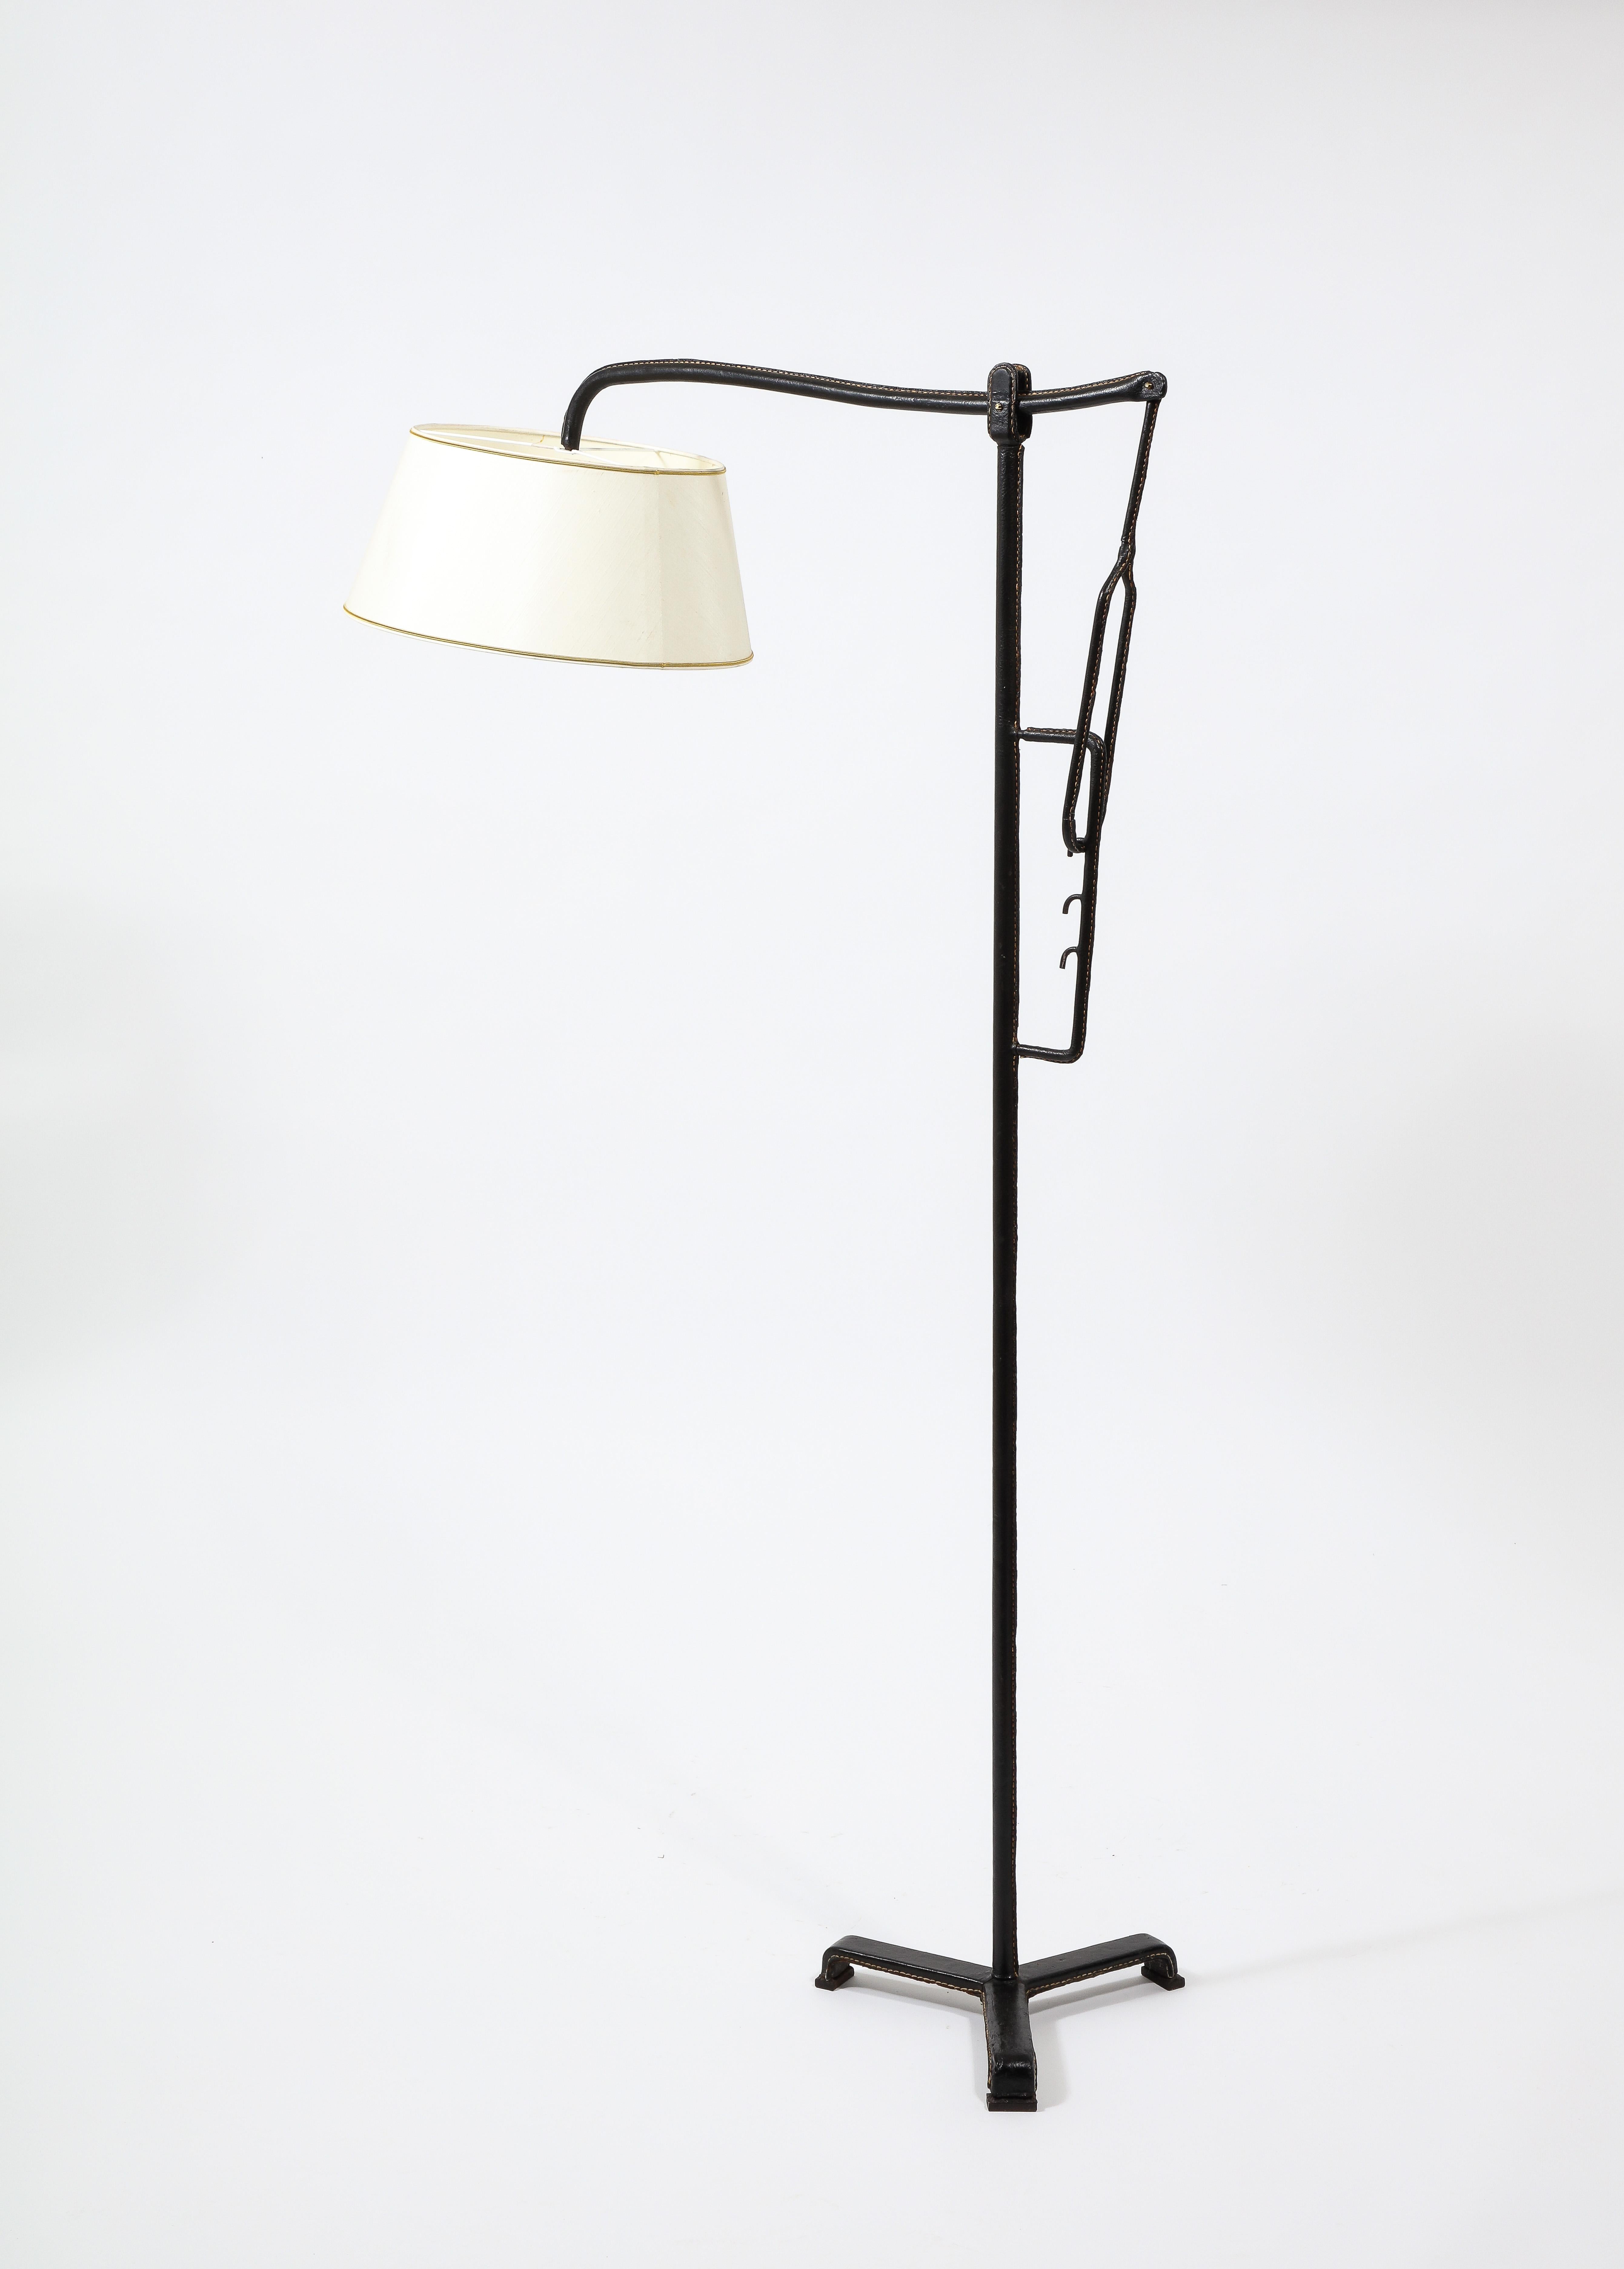 Jacques Adnet Black Leather Potence Floor Lamp, France 1940's For Sale 5